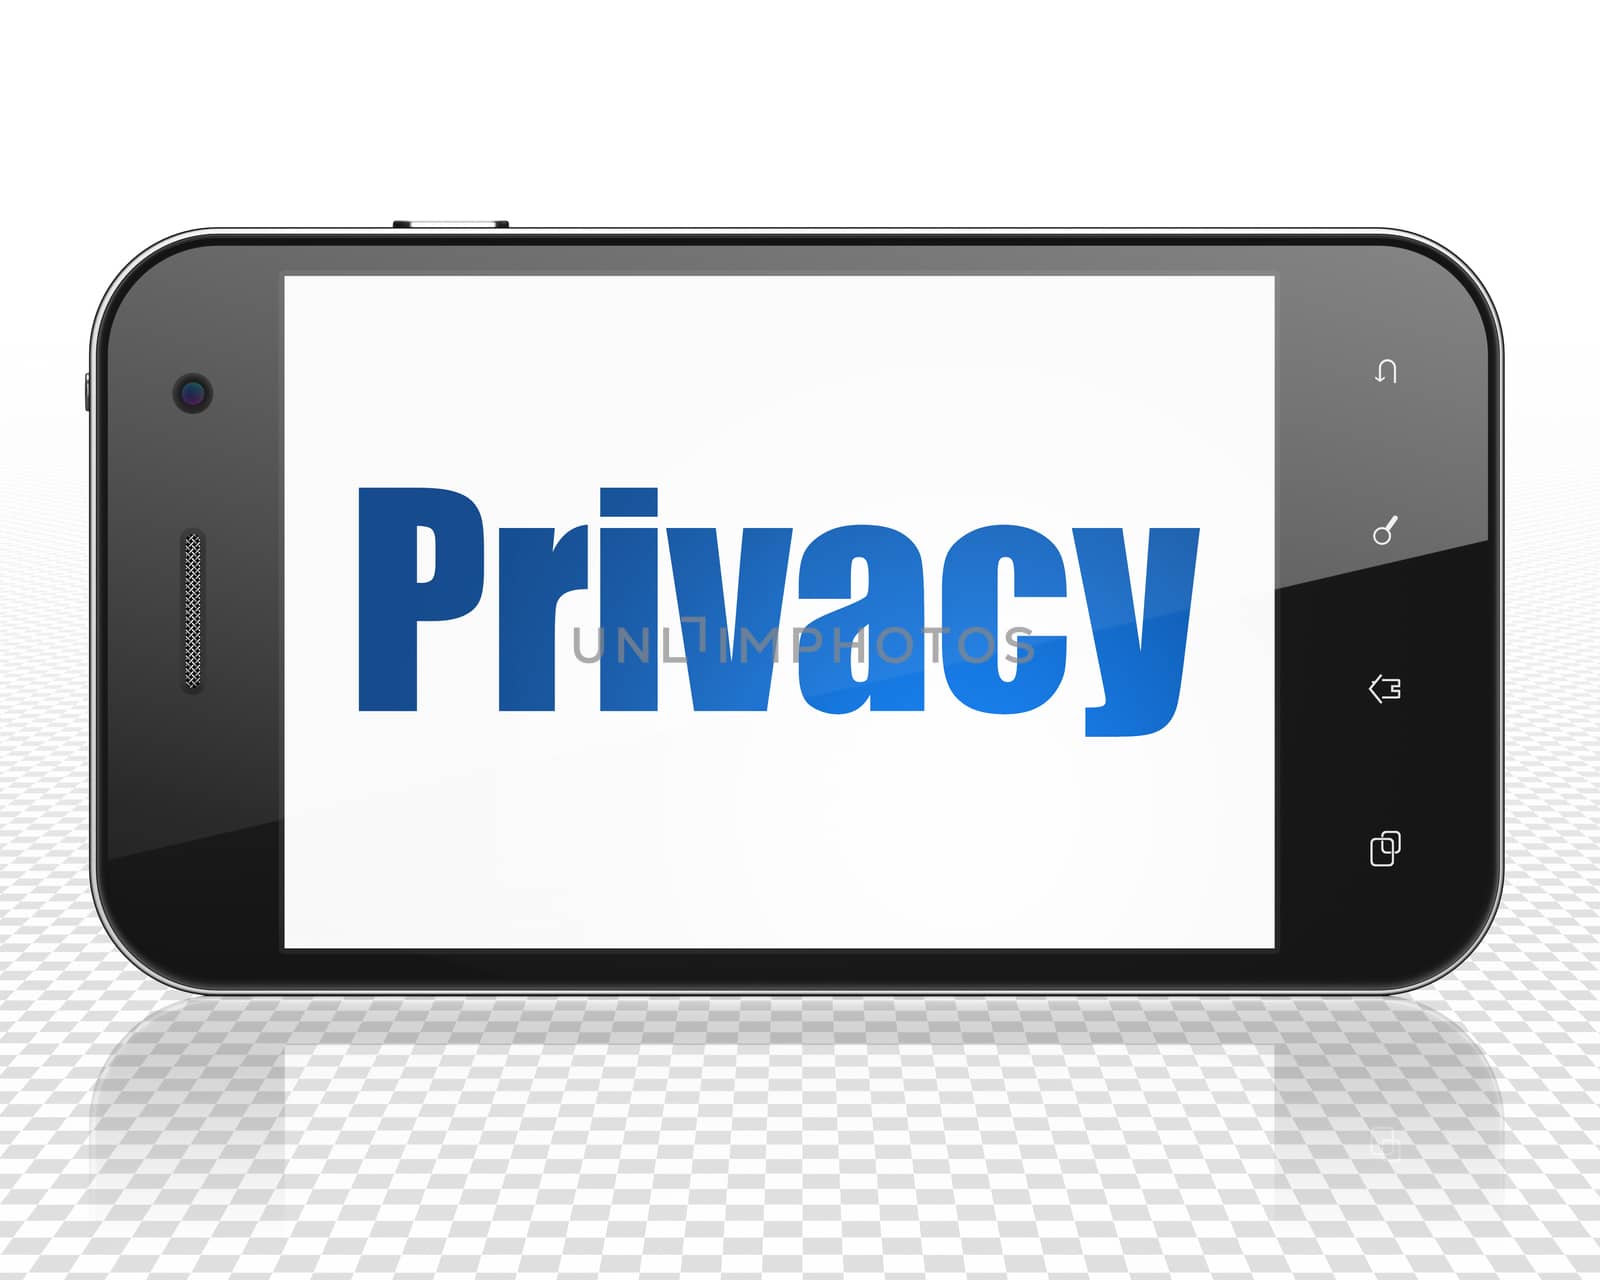 Protection concept: Smartphone with blue text Privacy on display, 3D rendering